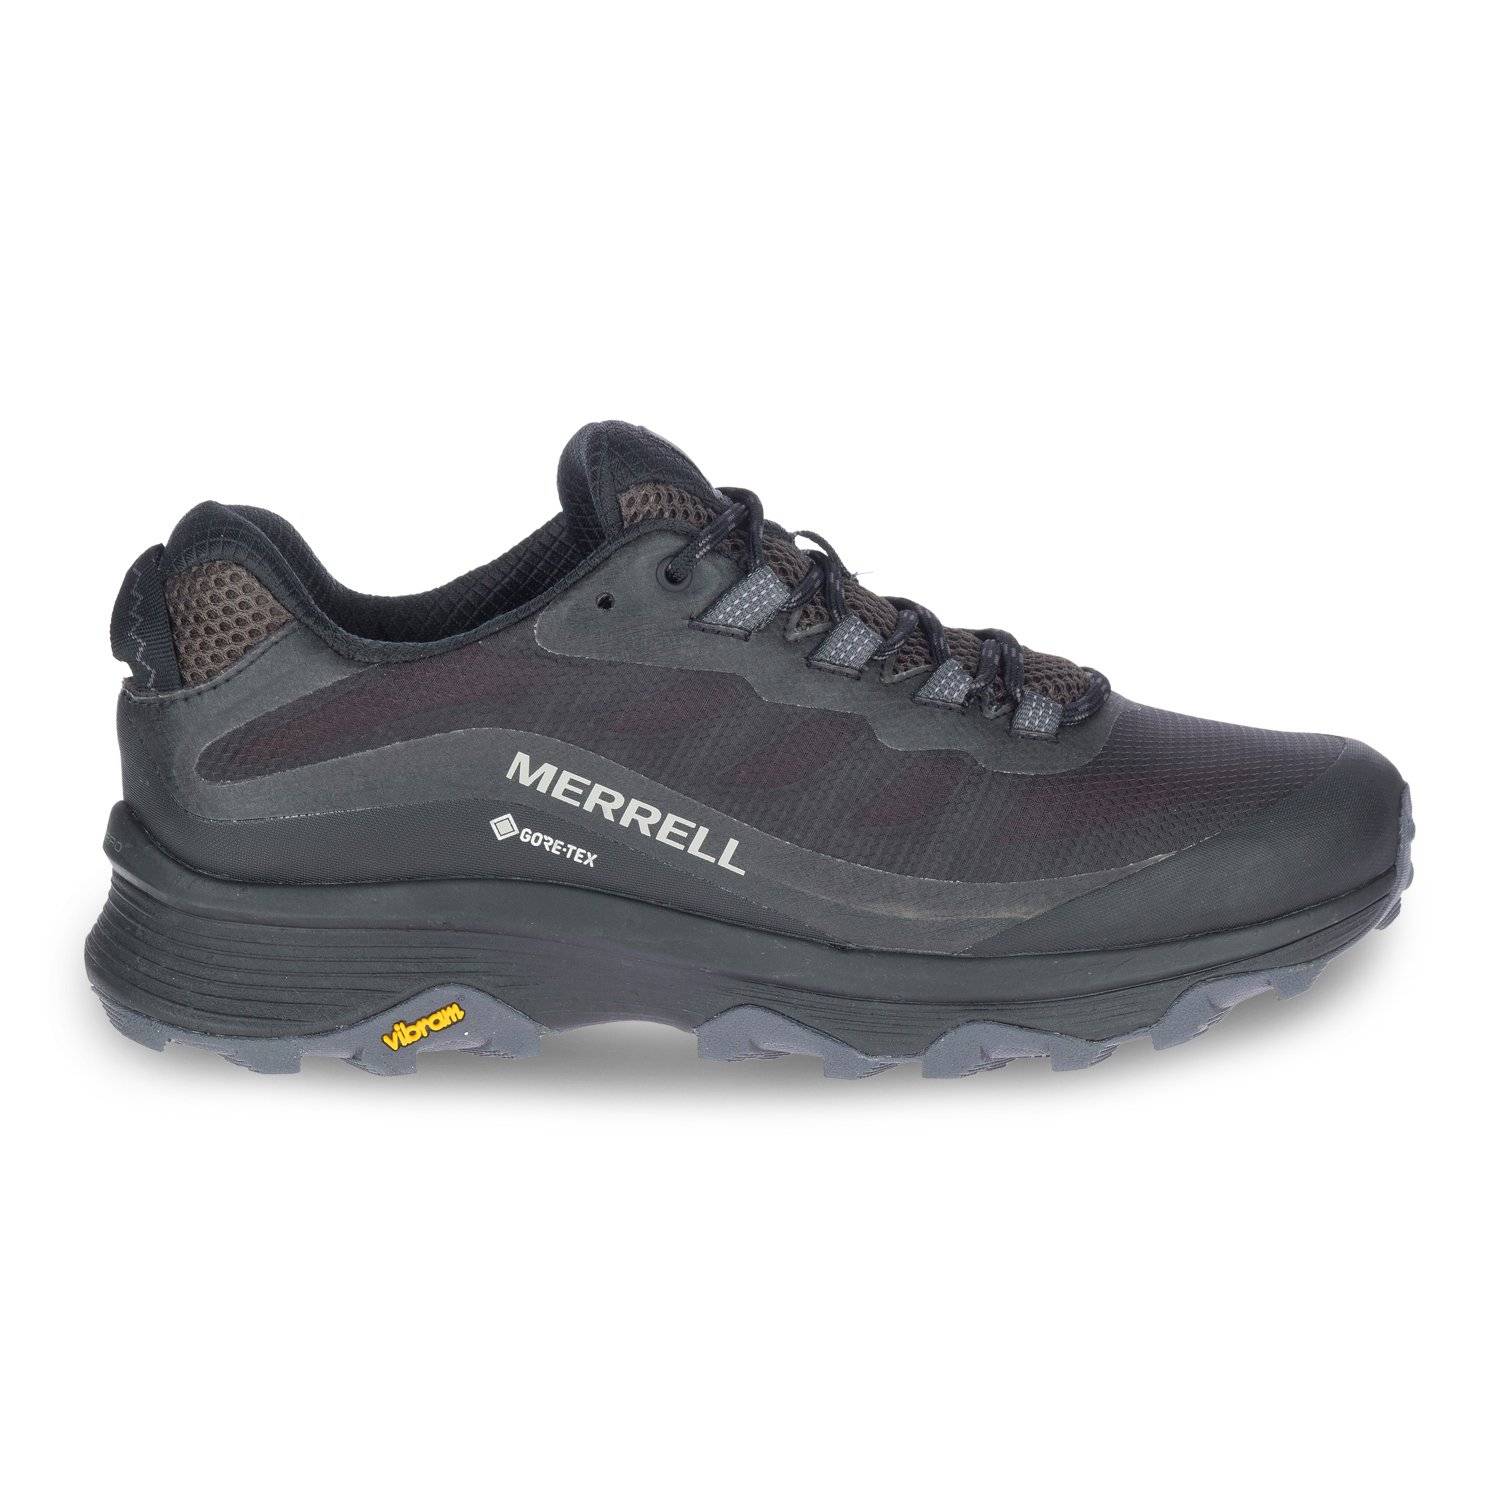 Merrell Men's Moab Speed GORE-TEX Hiking Shoes